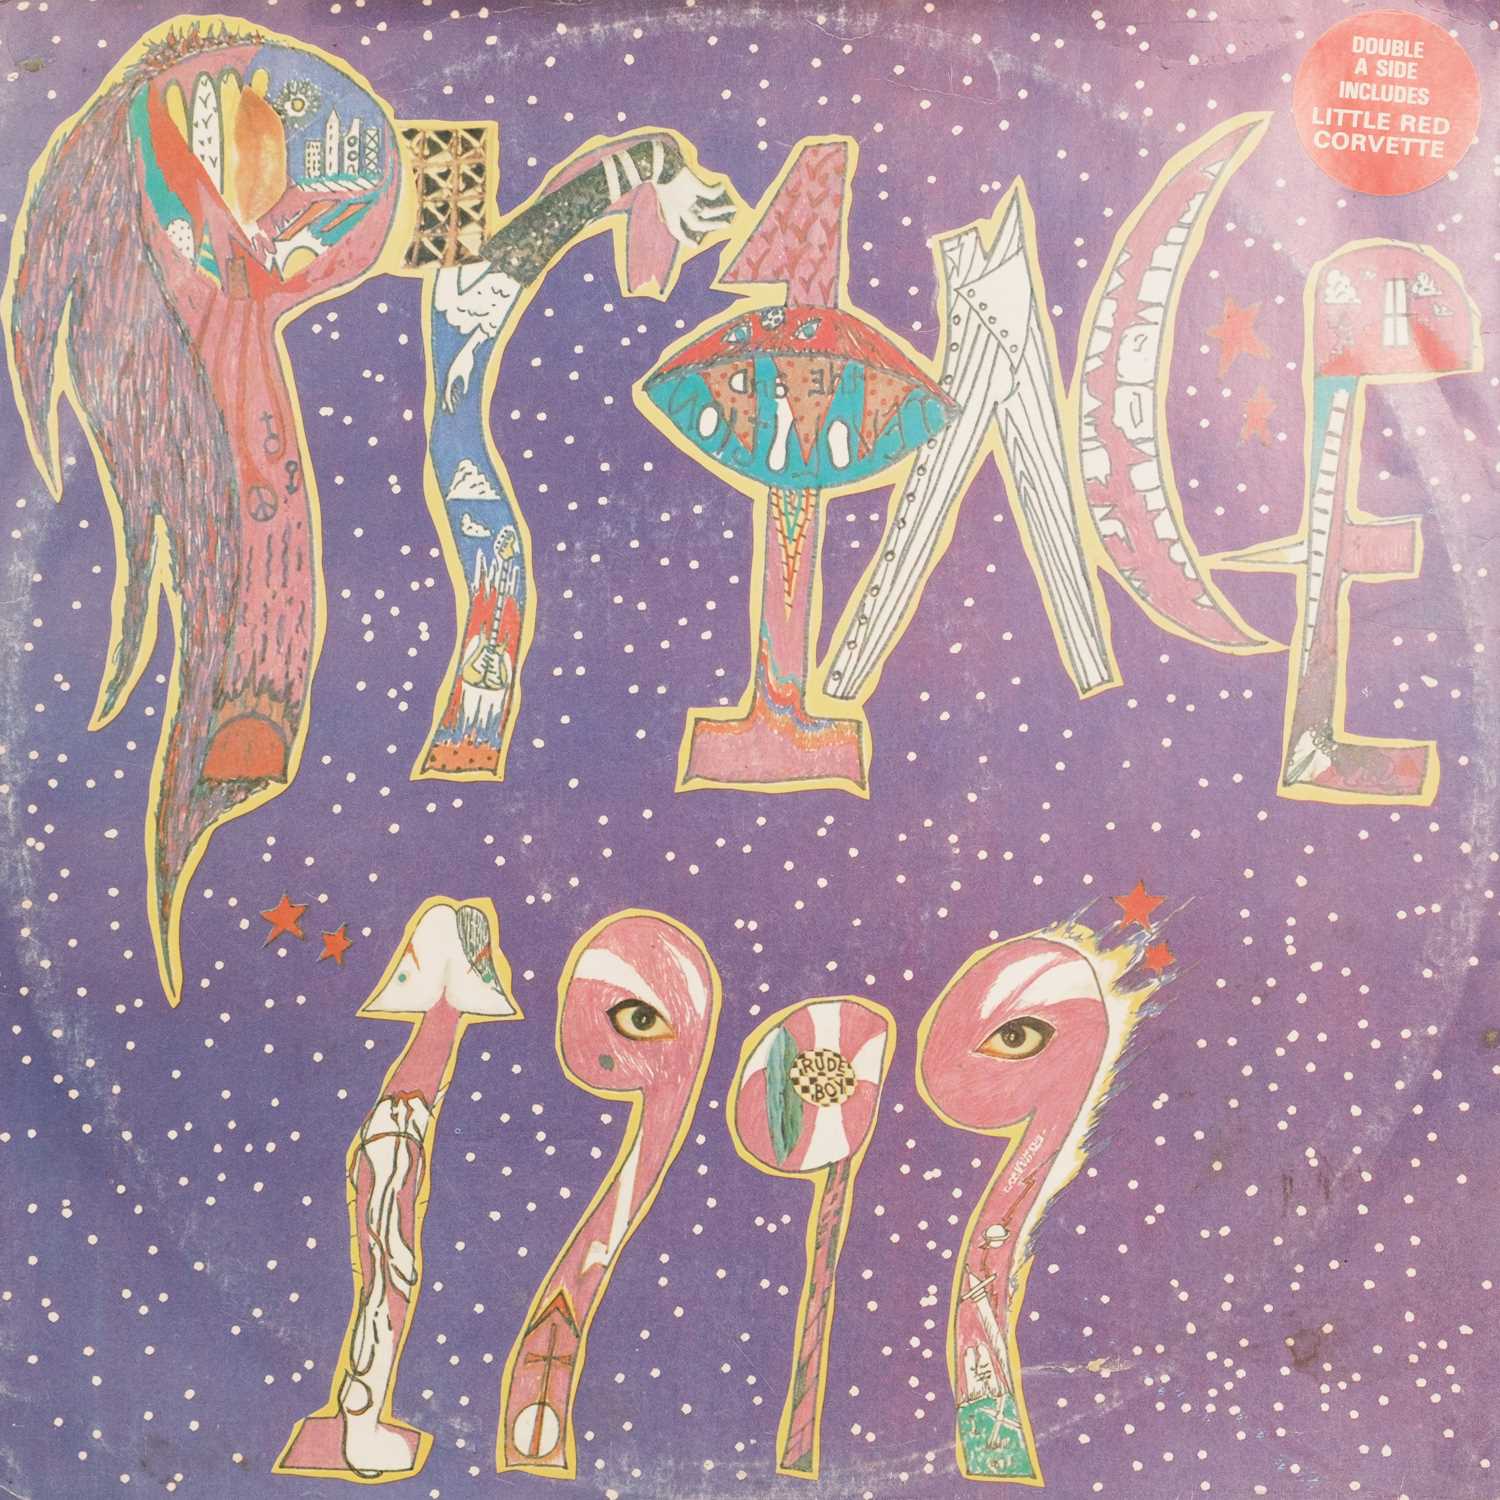 Prince 12" singles and picture discs. - Image 10 of 34